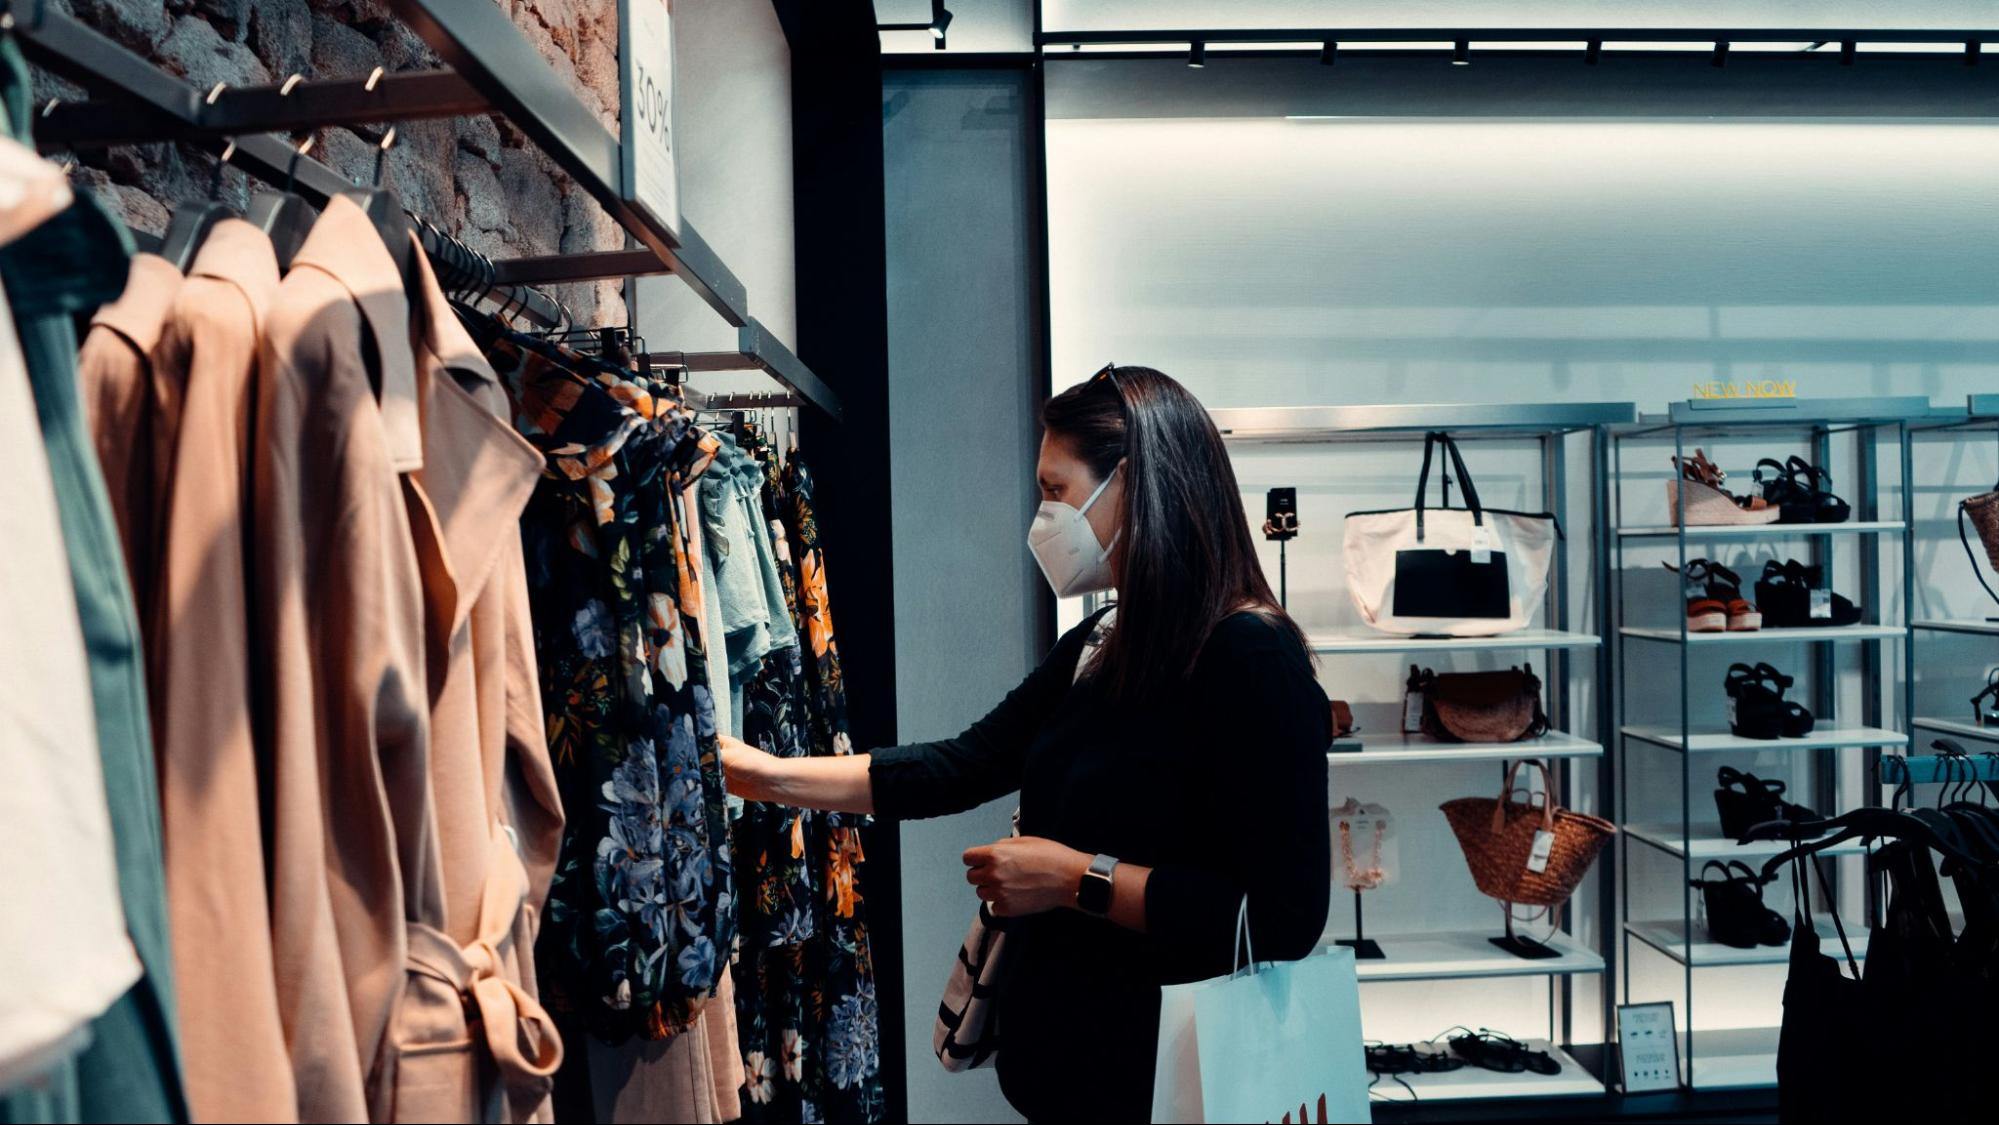 A woman checking for clothes in a store